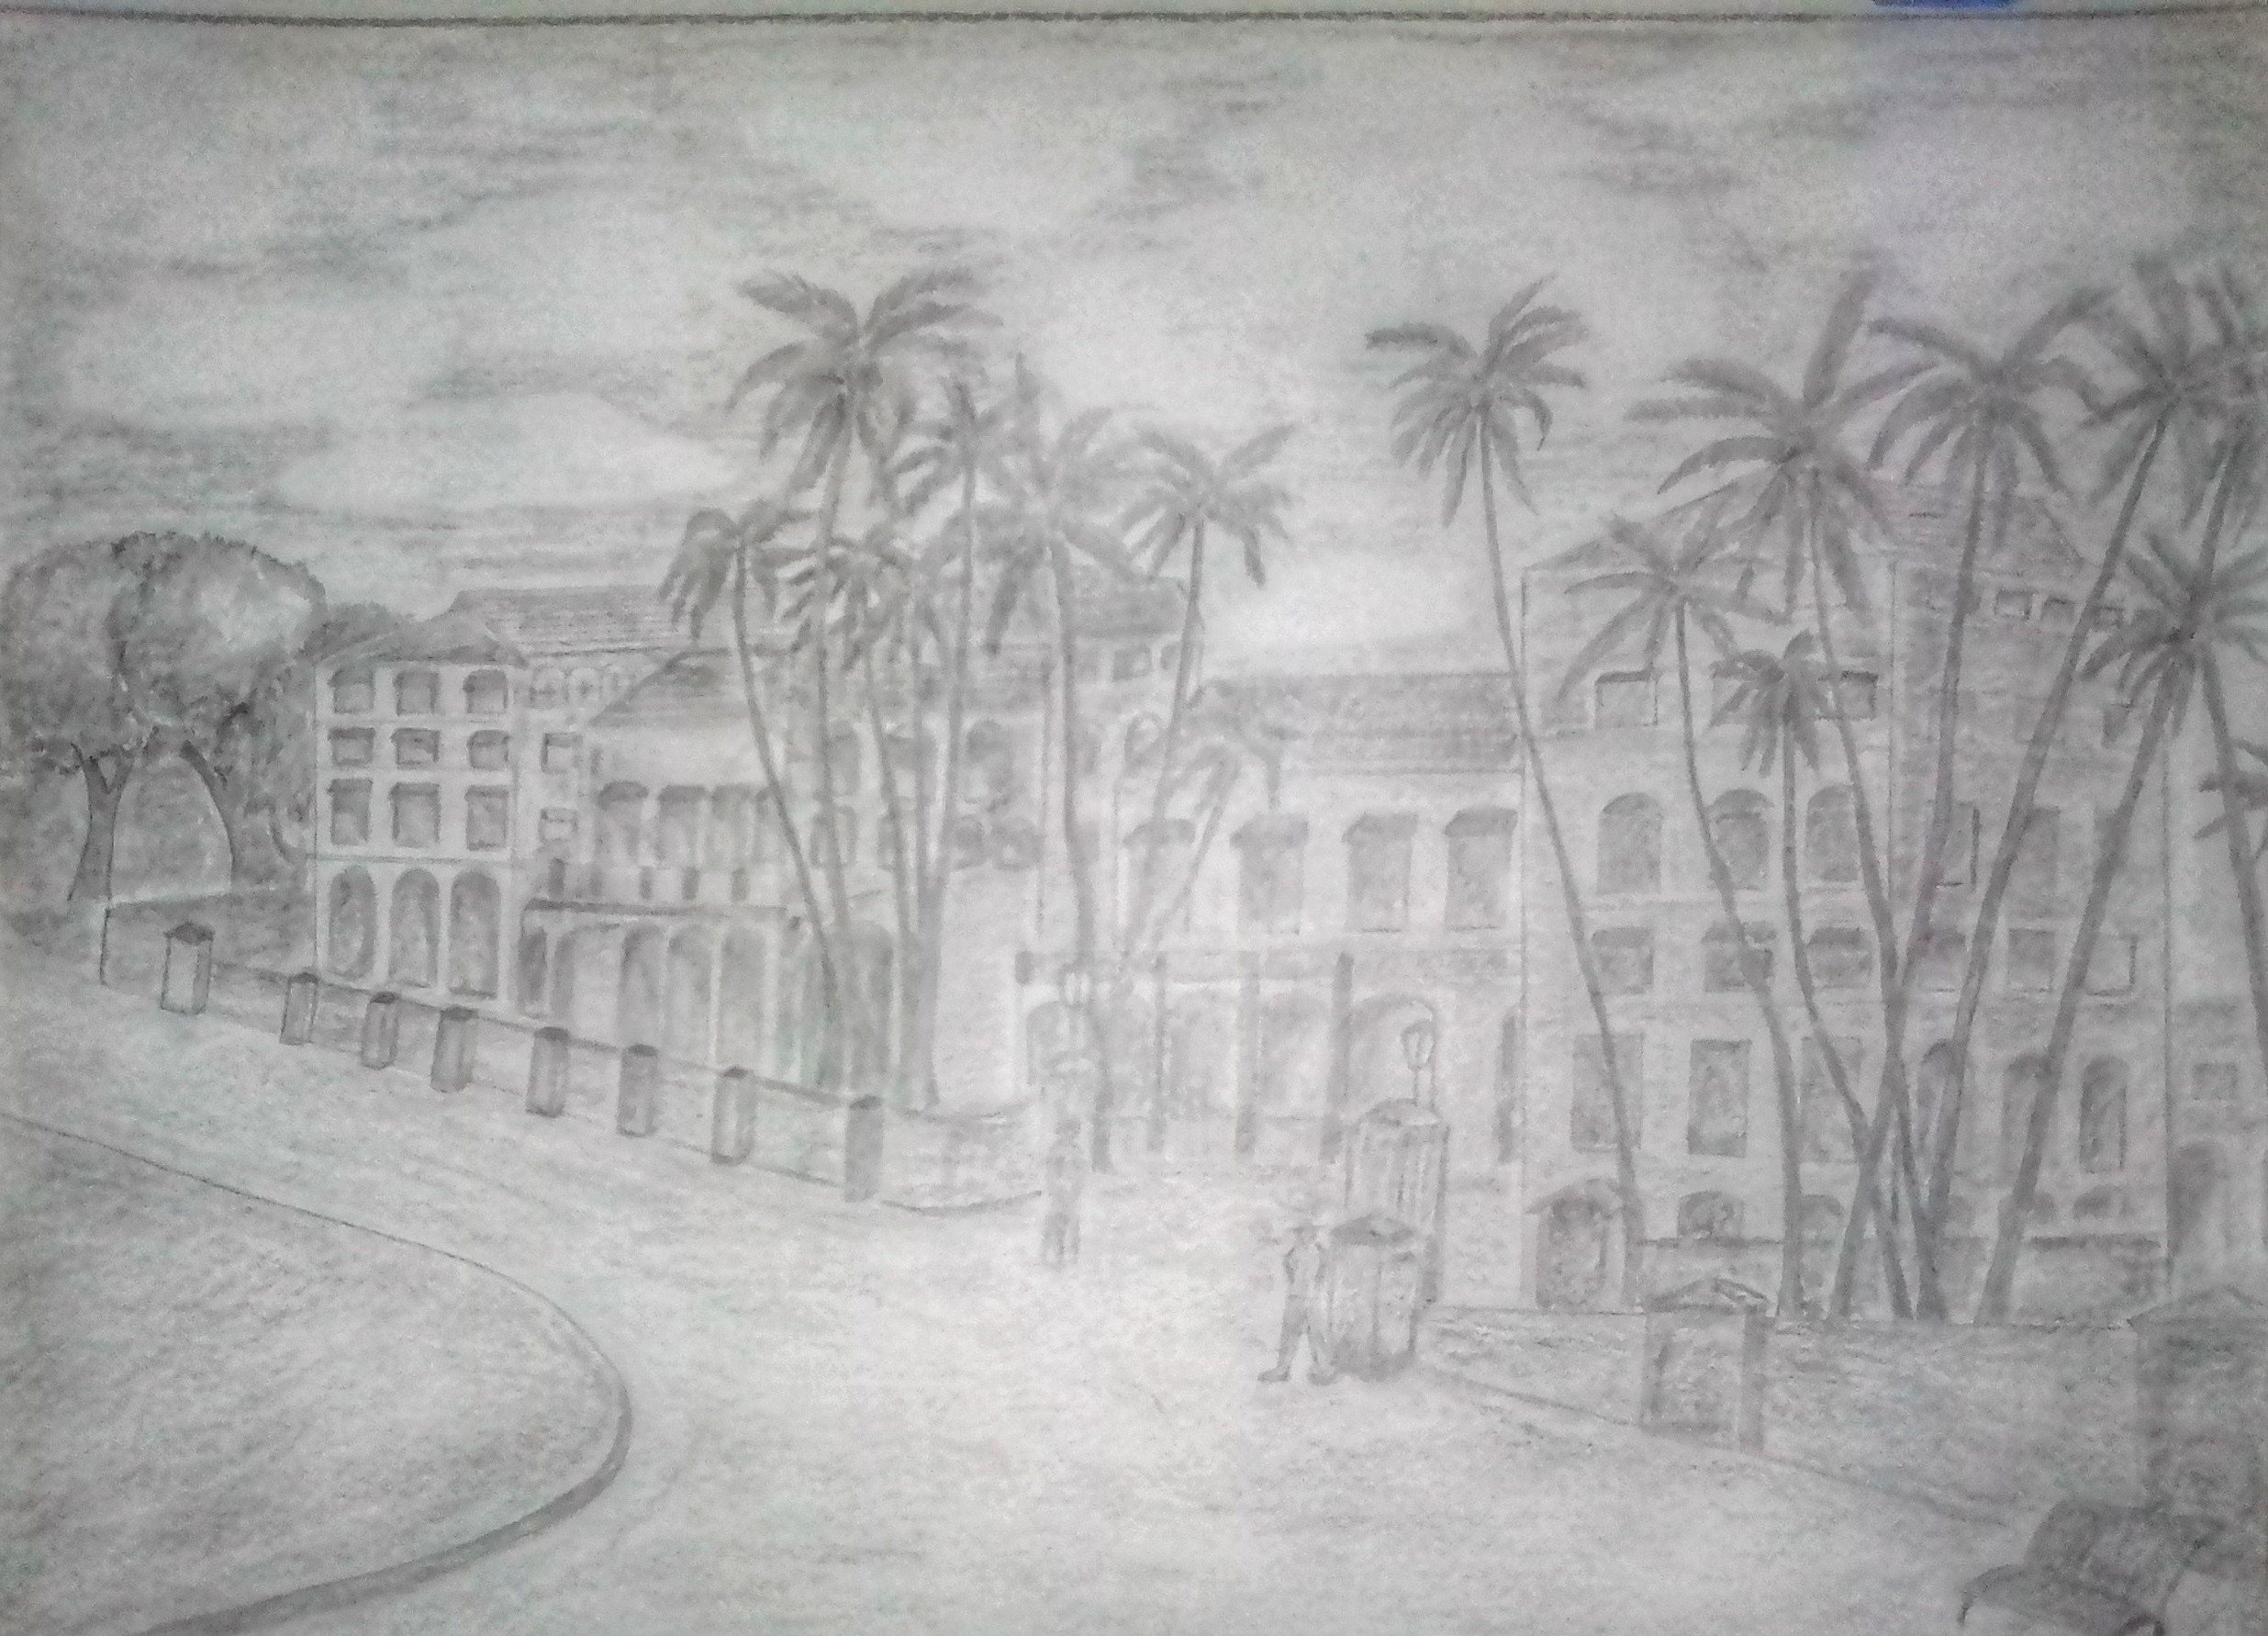 The Galle Face Hotel in 1800 s by L.A.R.Harsha De Silva